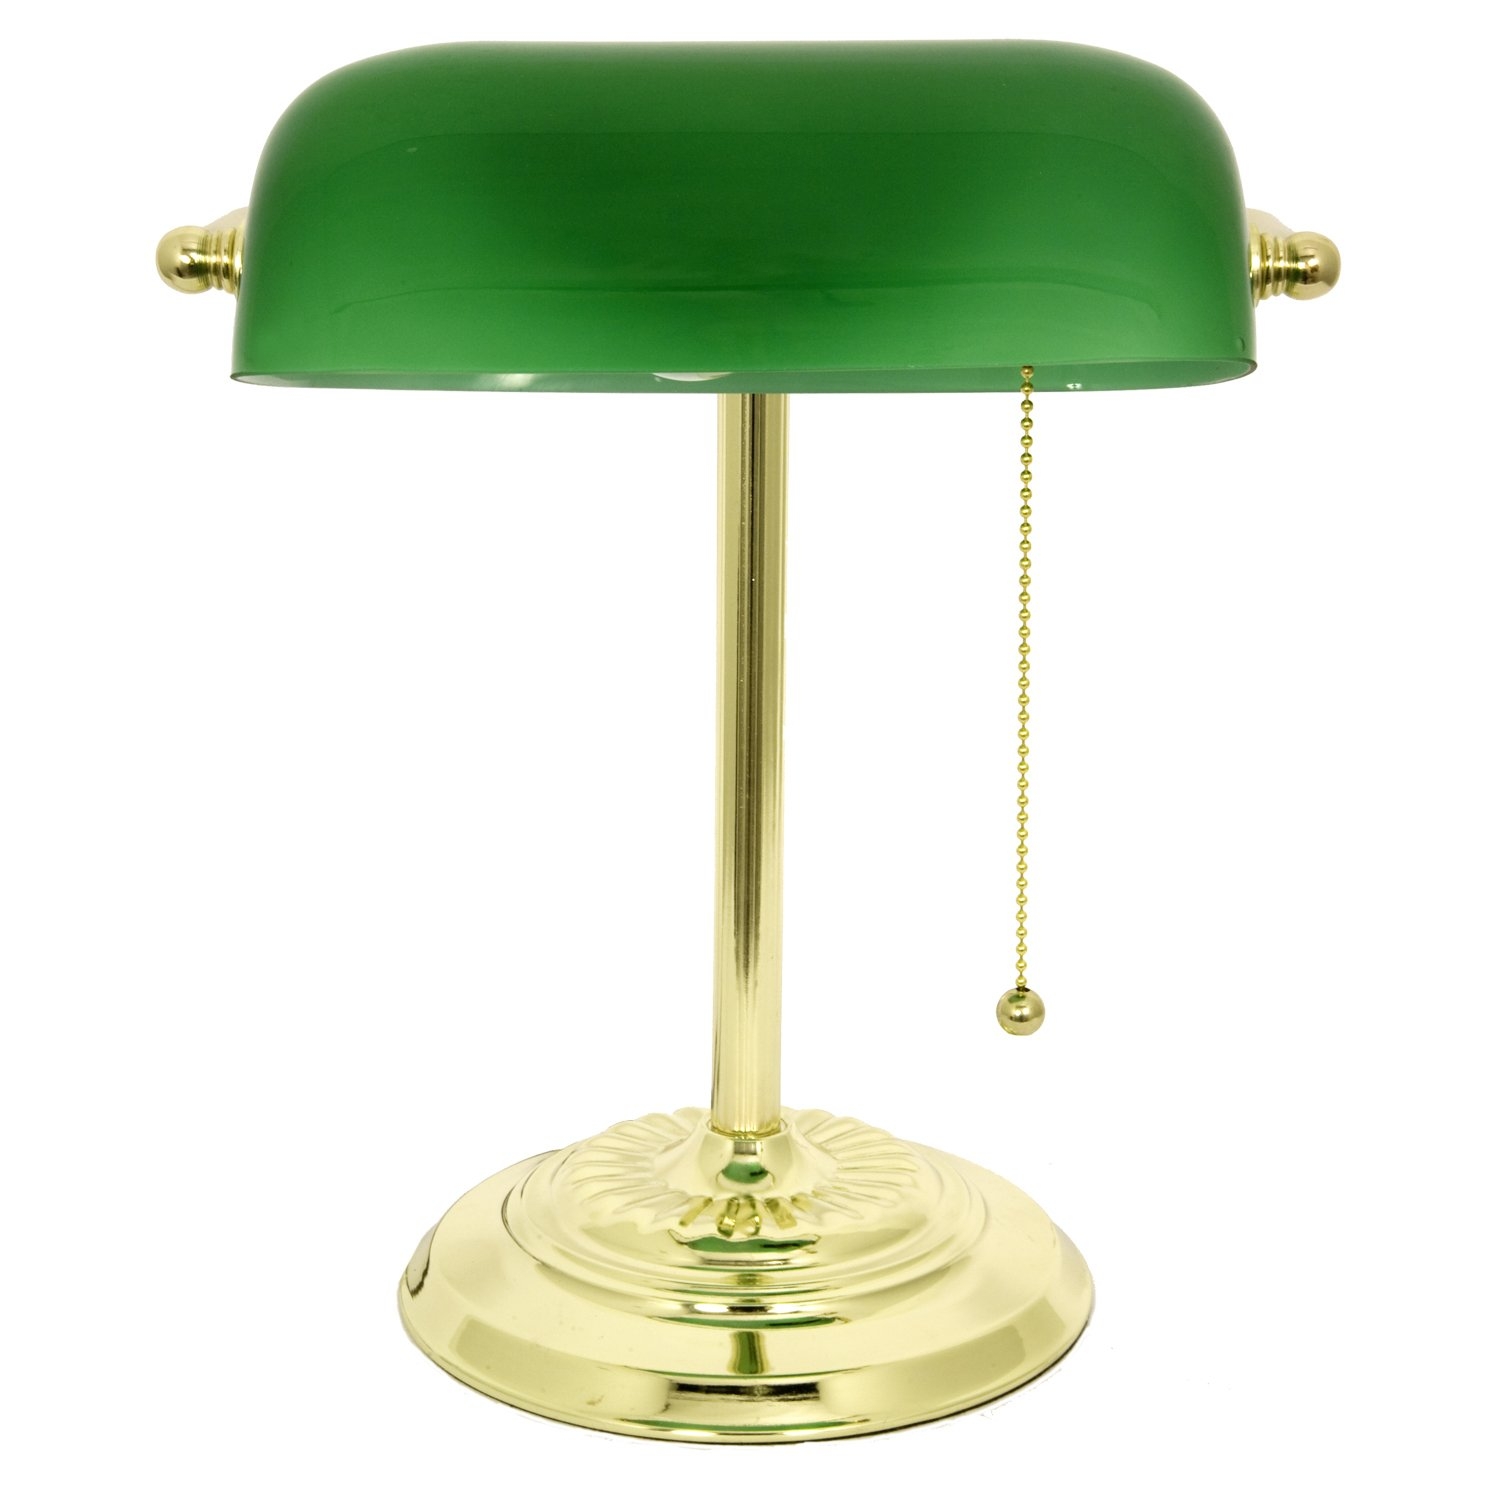 Banker's Lamp with Green Glass Shade, Brass Finish